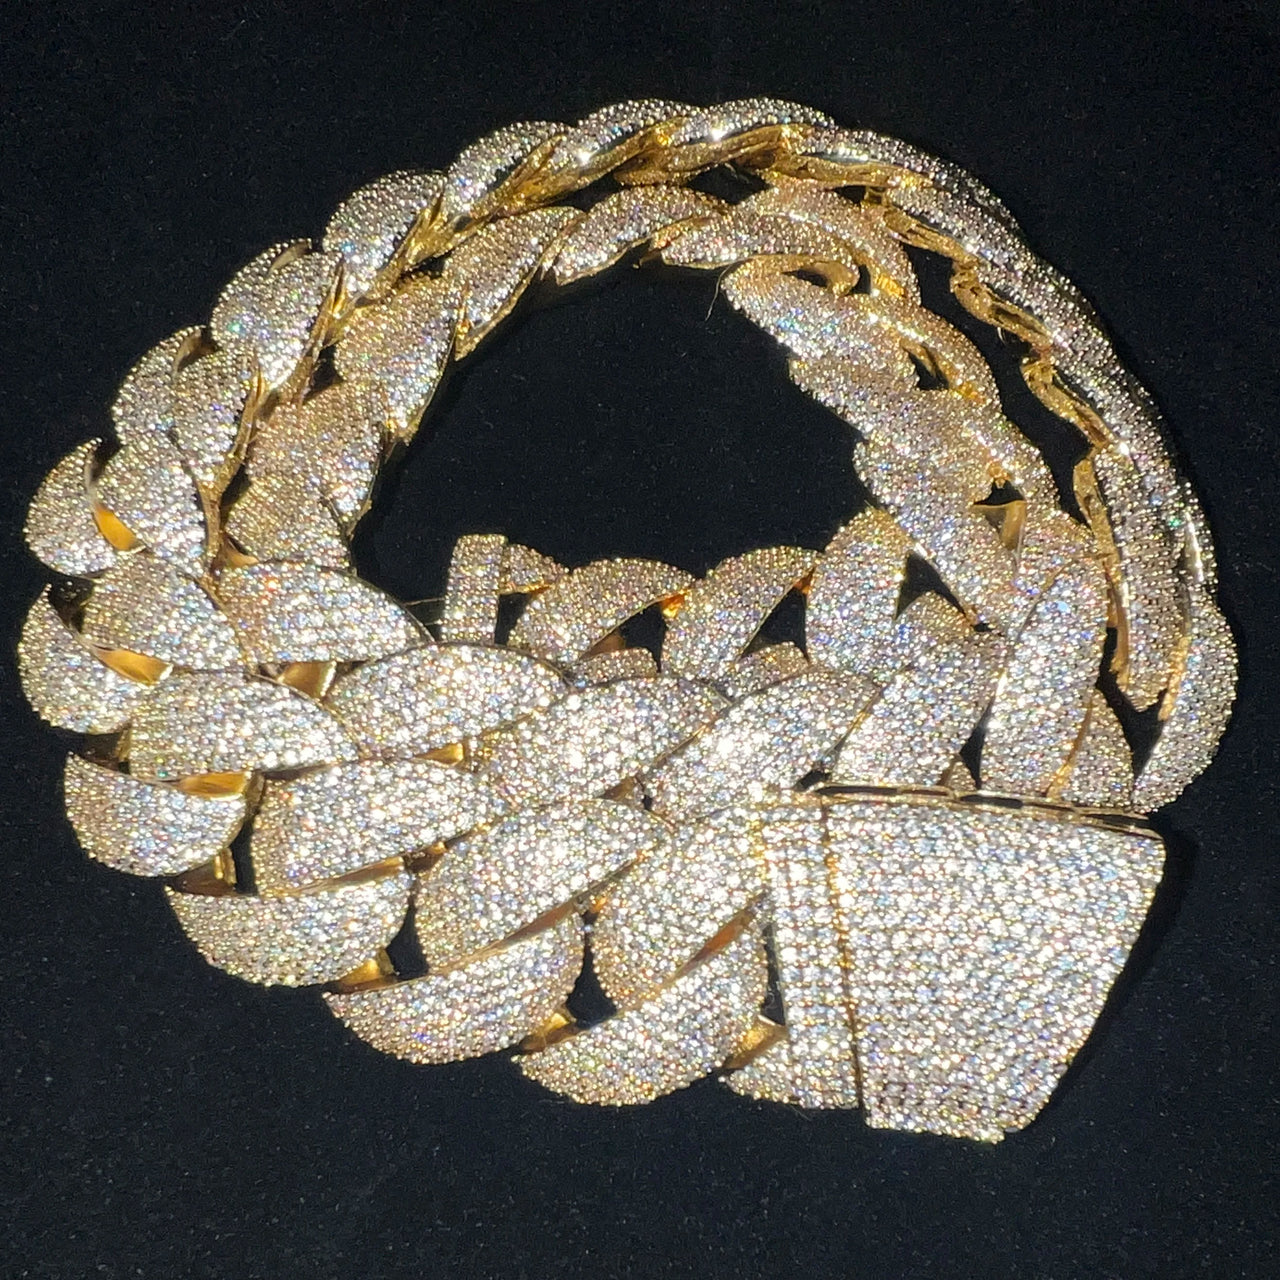 20mm Miami Curb Link Cuban Chain - Different Drips